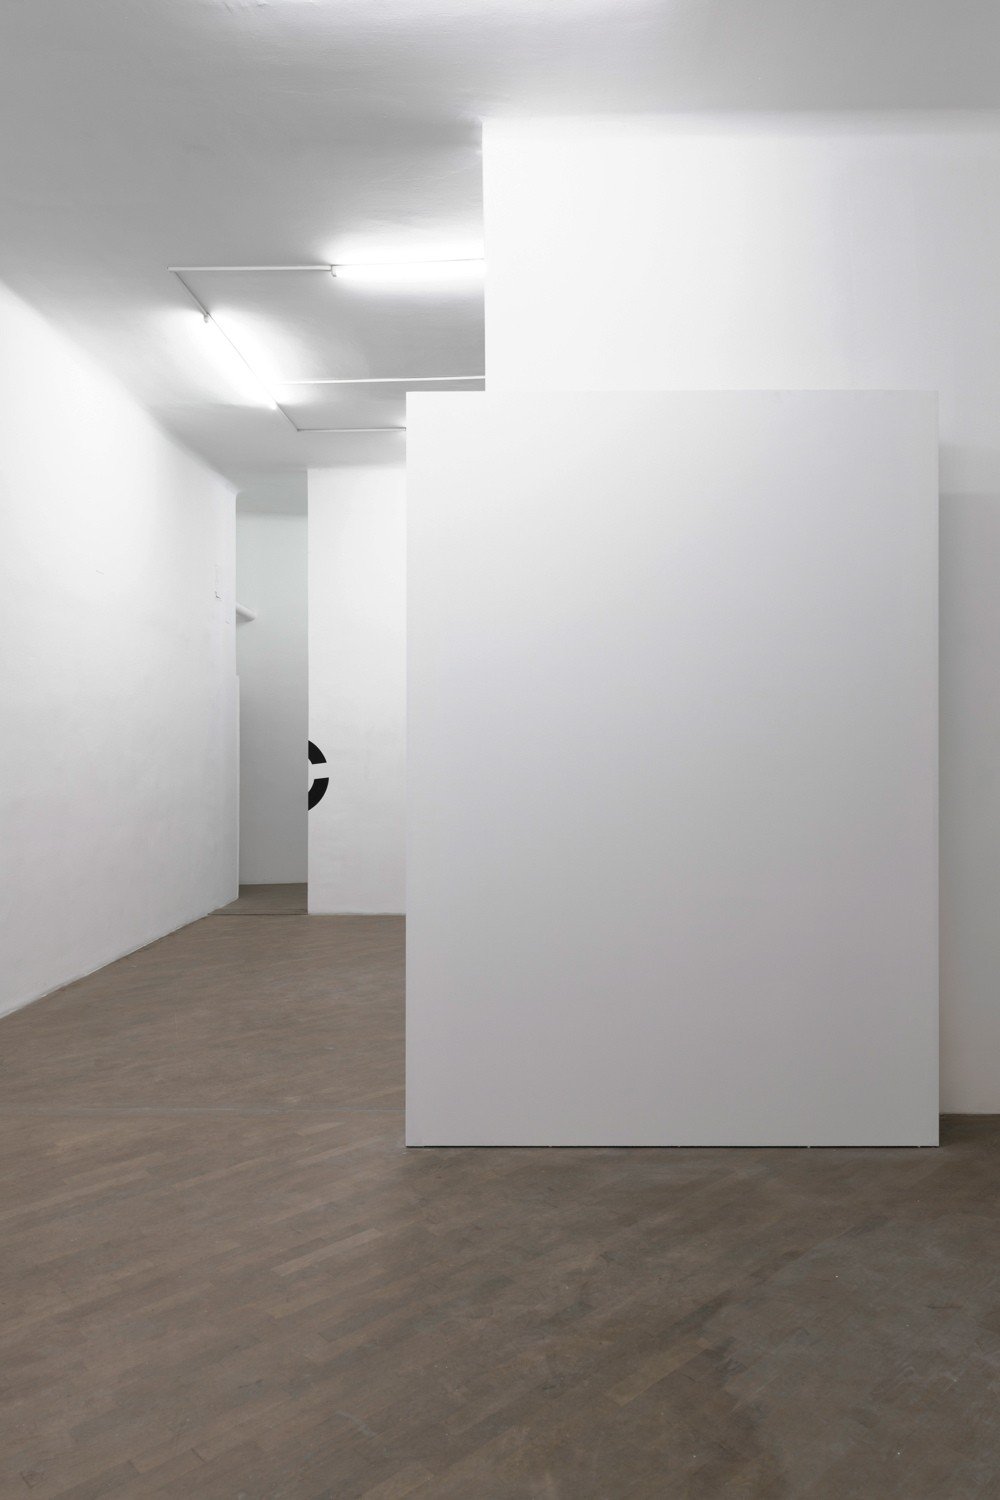 Benjamin HirteUntitled, 2012Lacquer on plywood280 x 210 cm